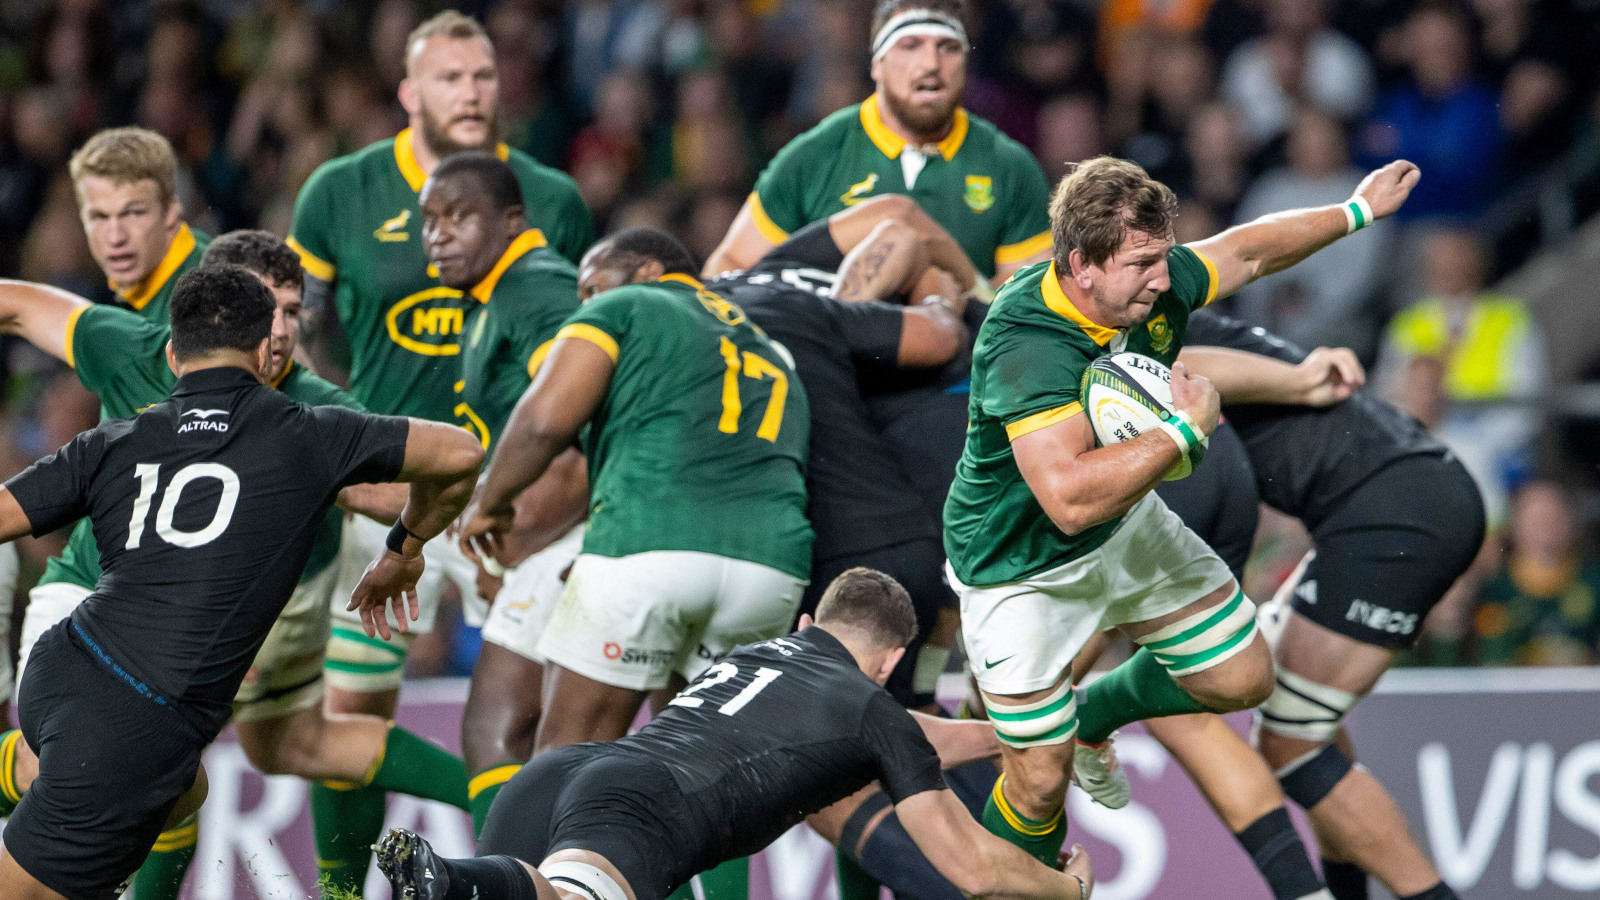 The World Rugby Rankings are about to Change, and the Top-ranked Team Could See a Significant Drop in their Position